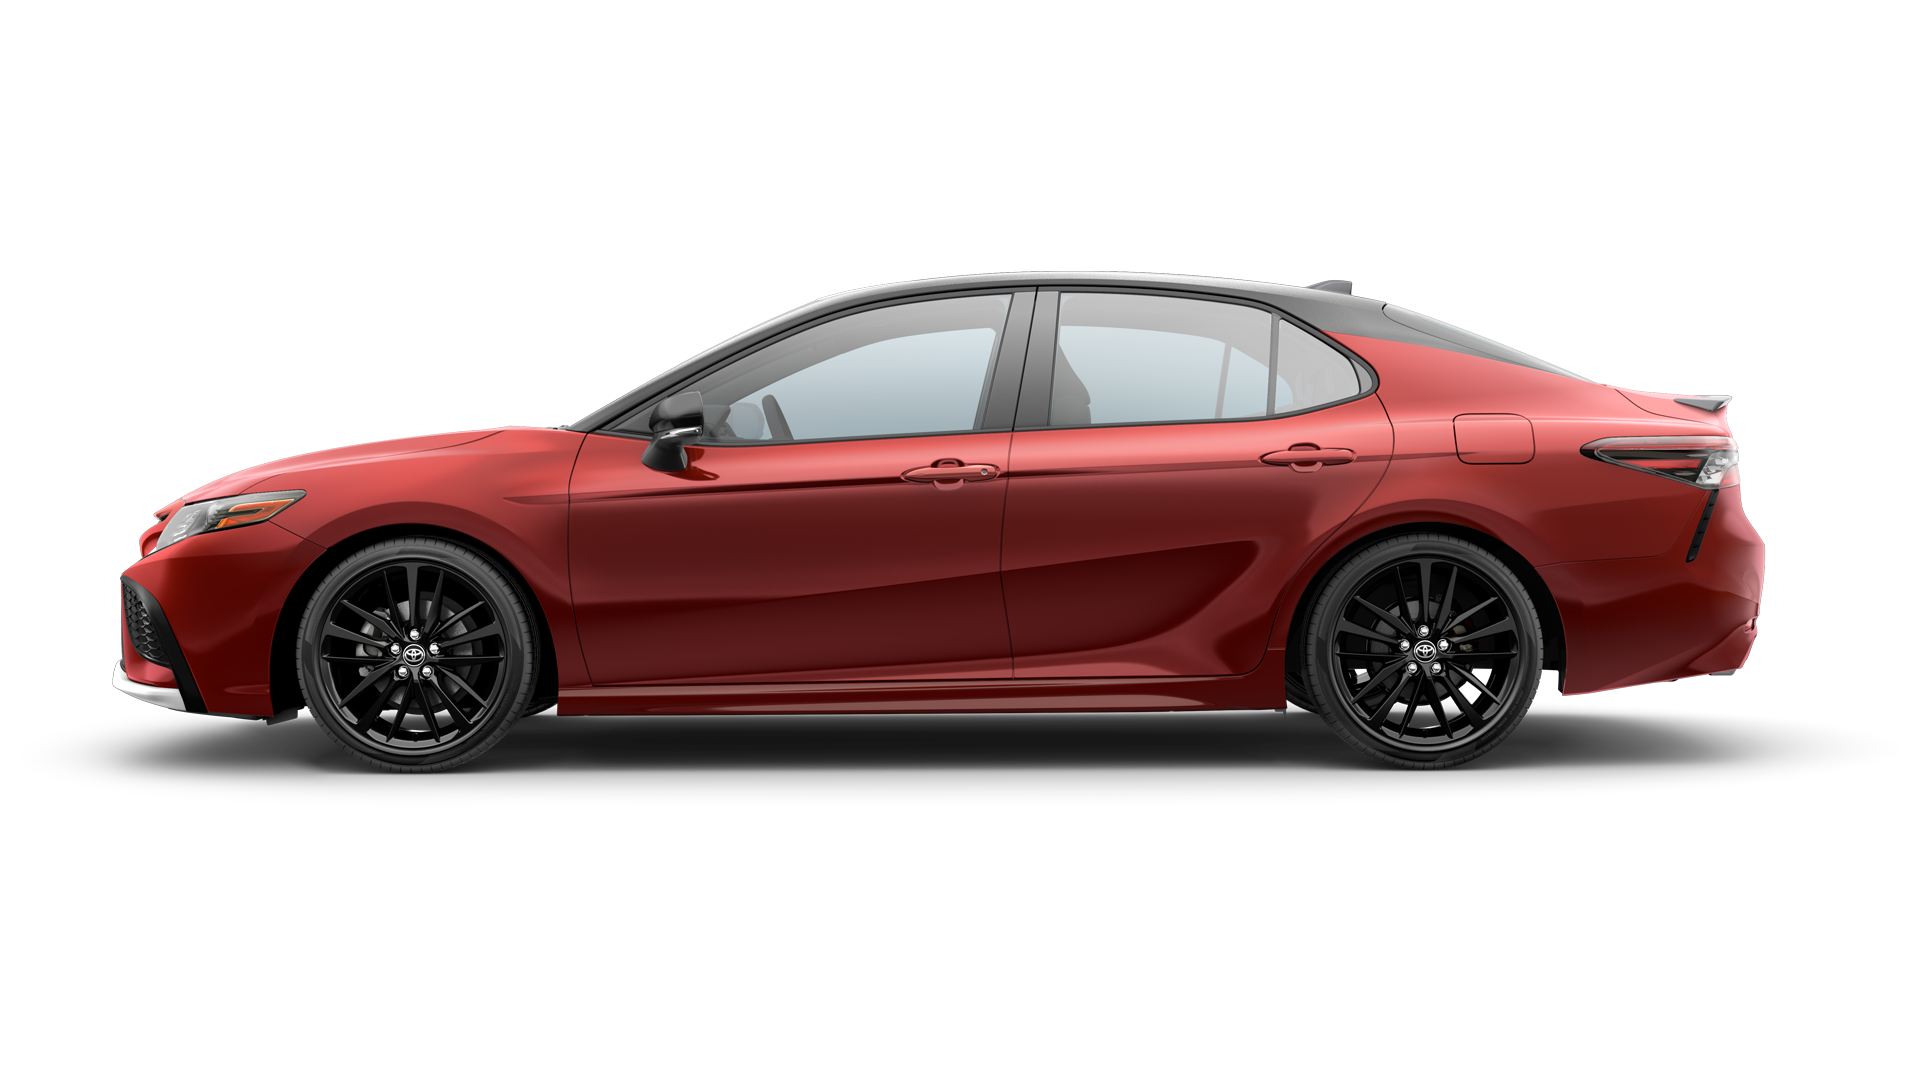 2024 Toyota Camry in Supersonic Red/Midnight Black Metallic Roof*.